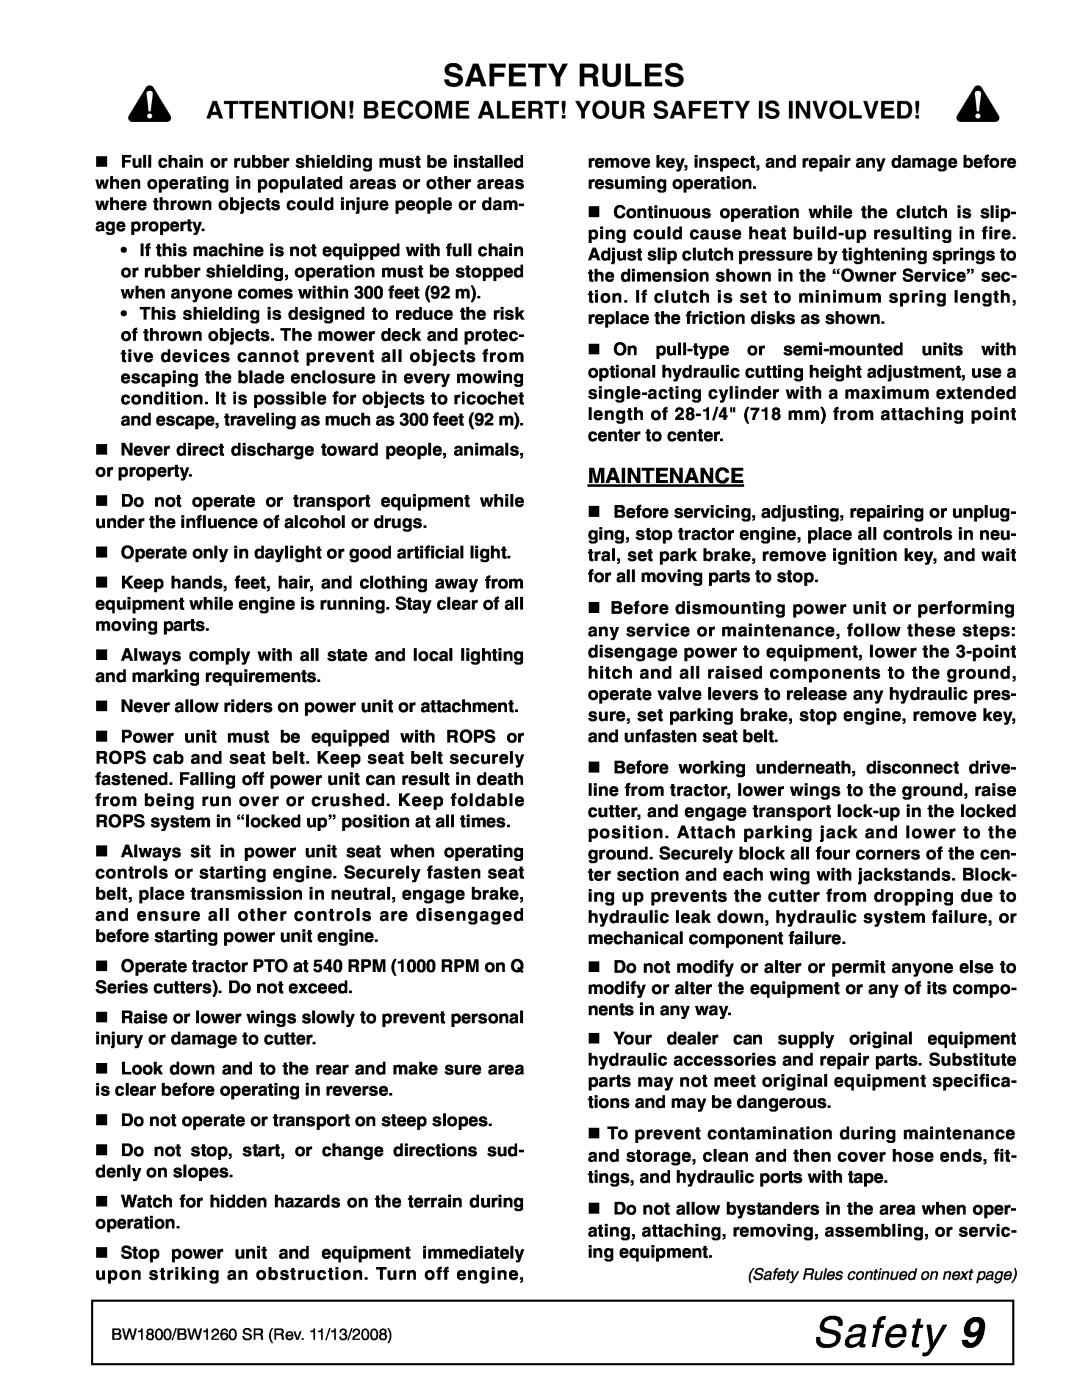 Woods Equipment BW240HDQ manual Safety Rules, Attention! Become Alert! Your Safety Is Involved, Maintenance 